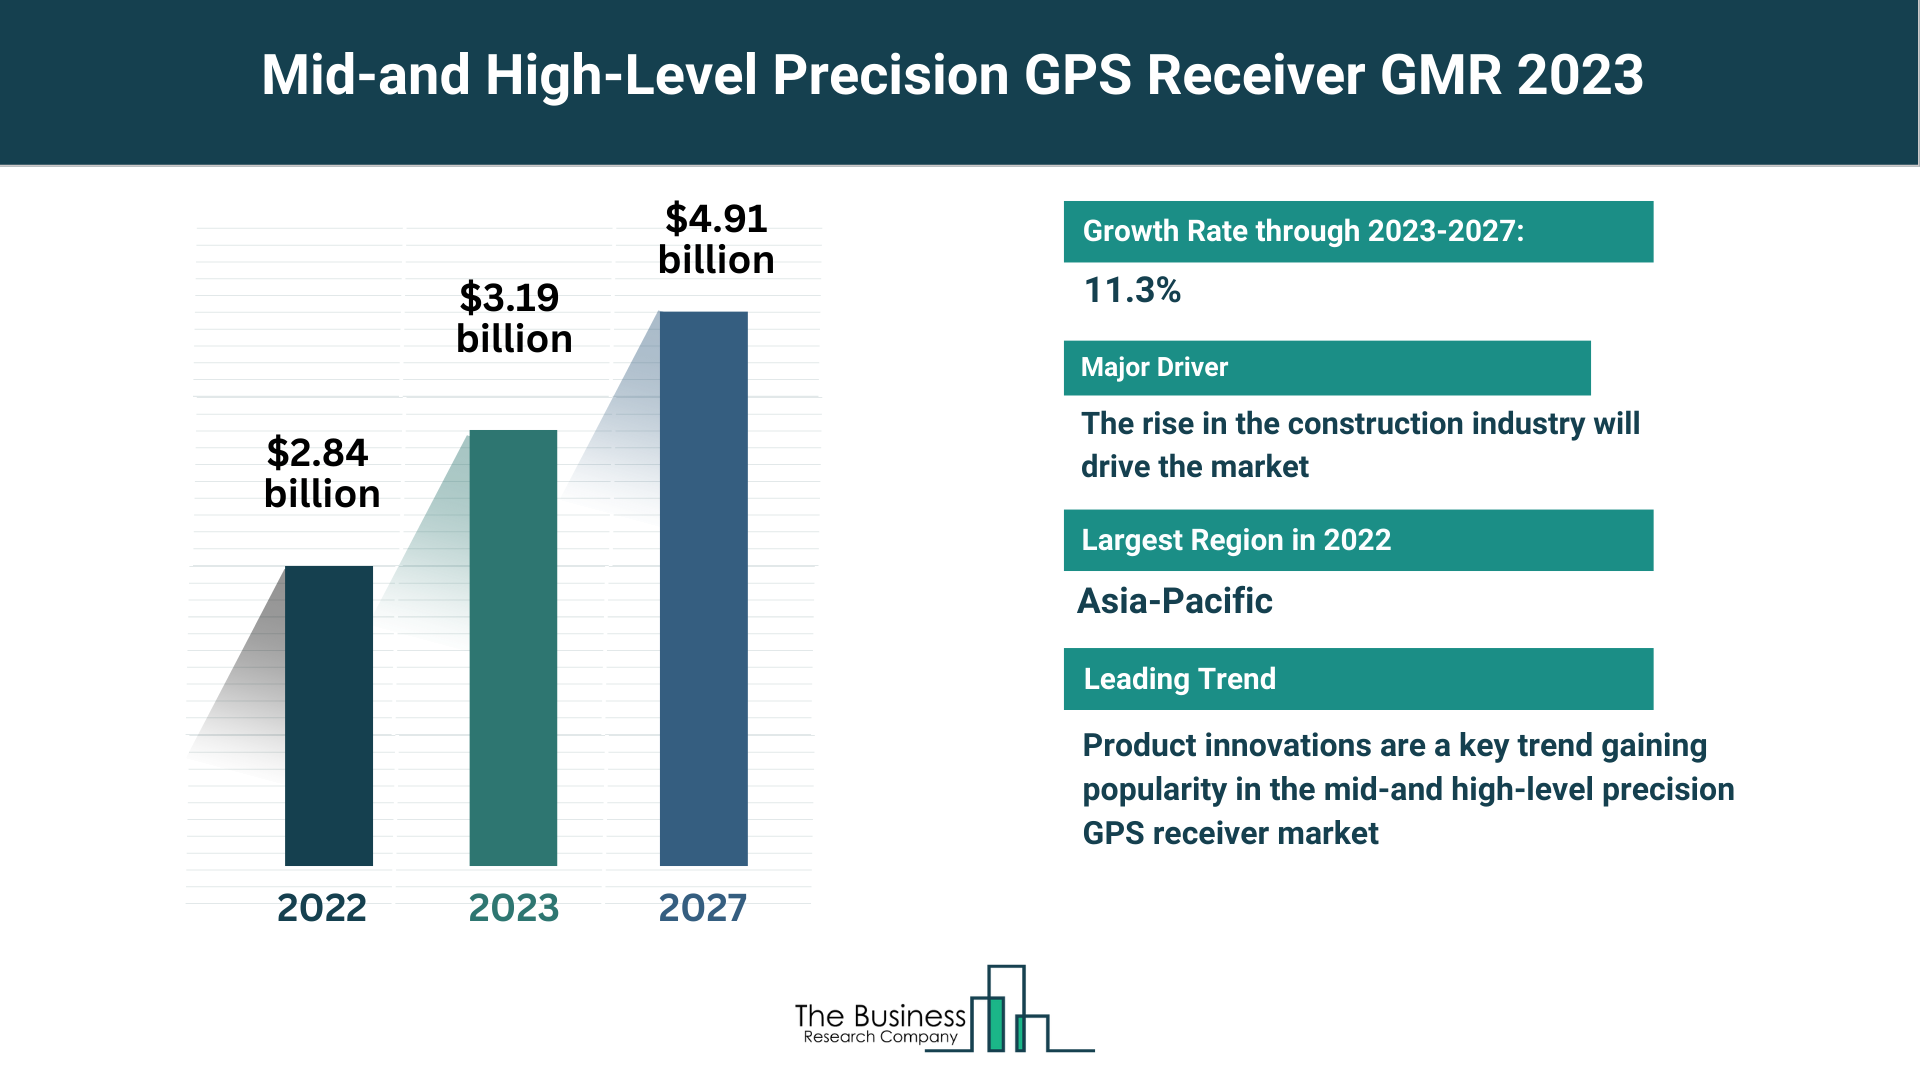 Global Mid-and High-Level Precision GPS Receiver Market